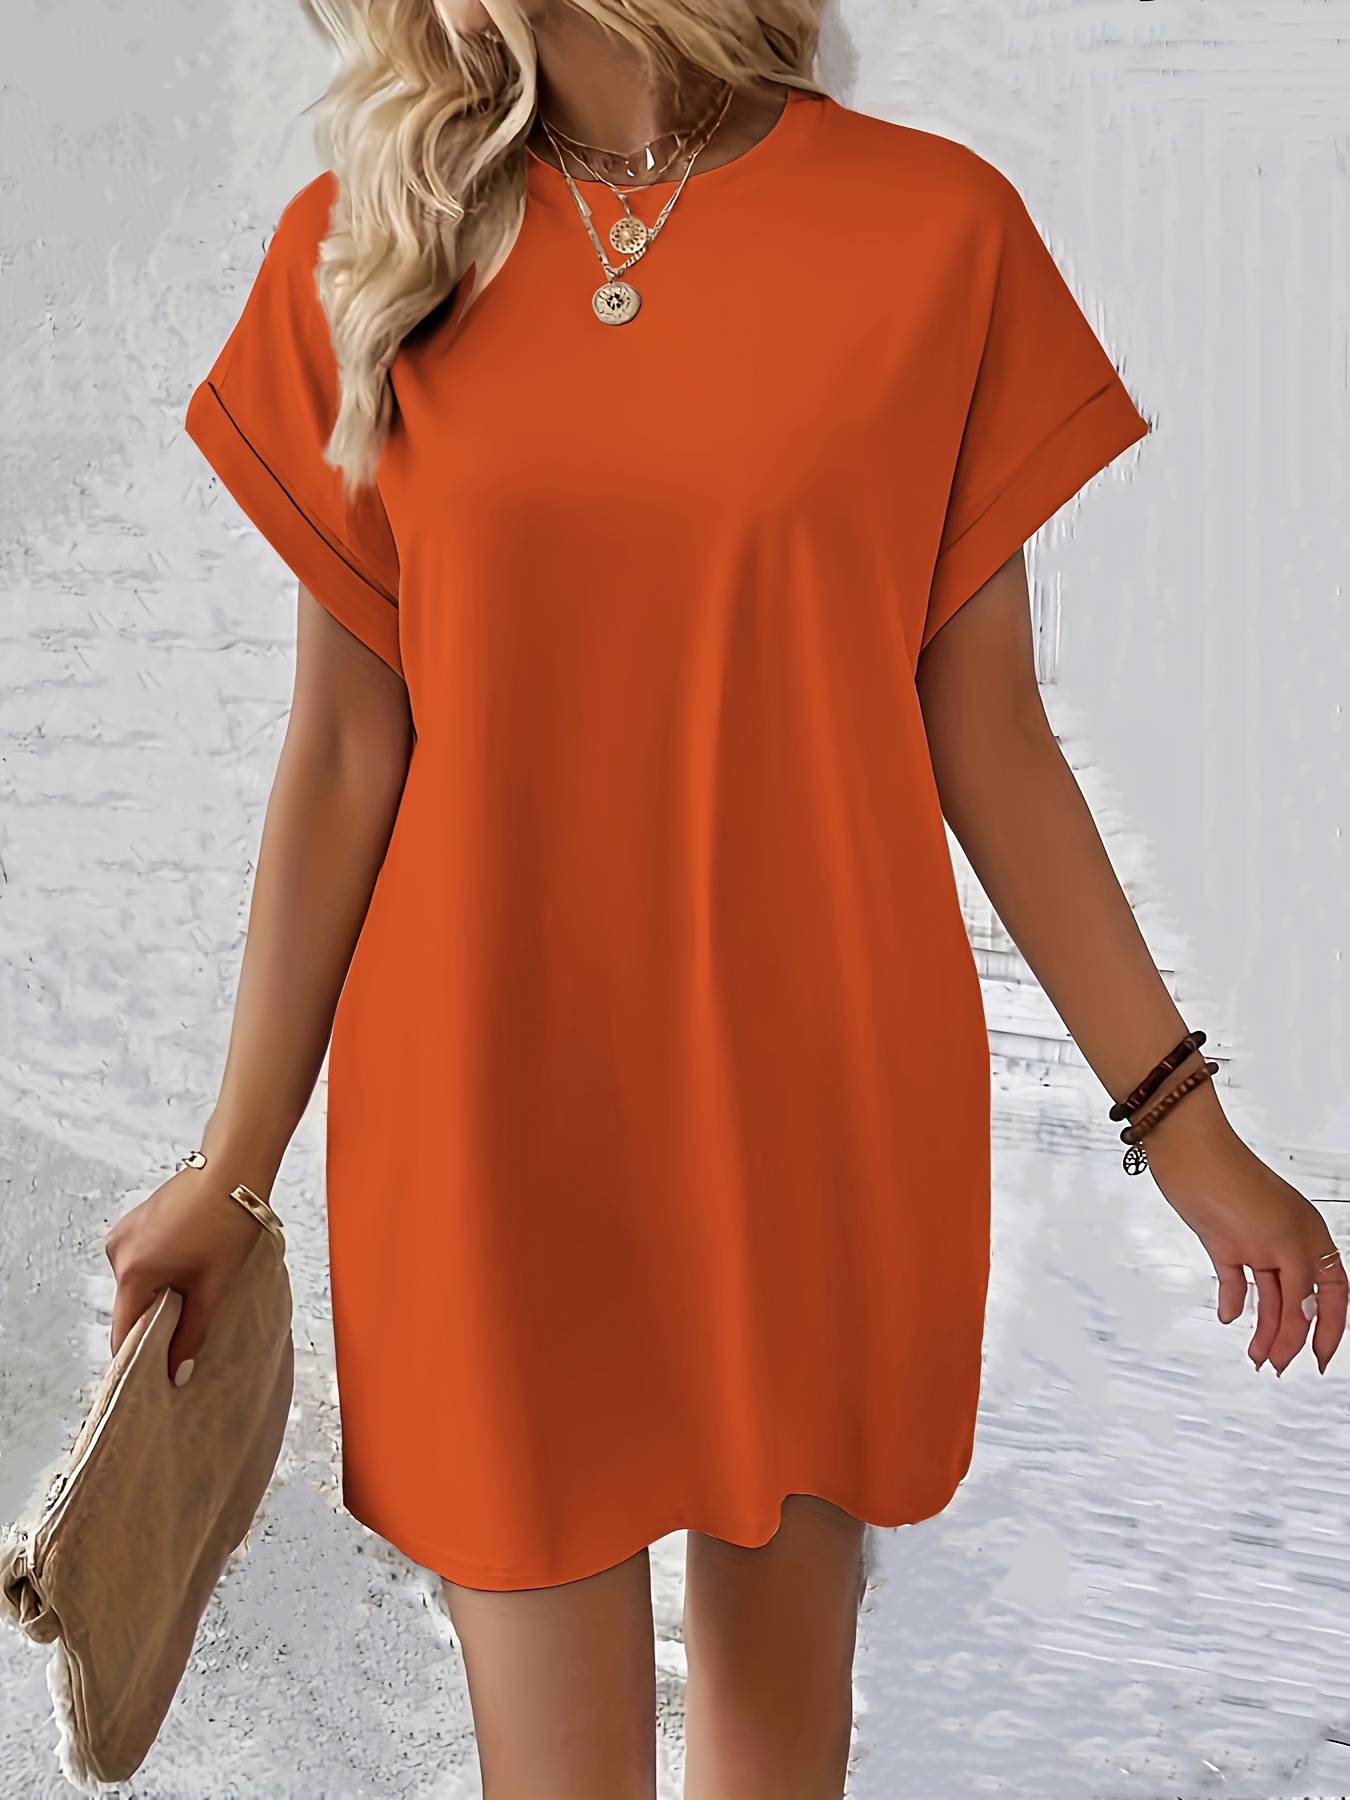 solid color crew neck dress casual short sleeve loose fit dress for spring summer womens clothing details 2